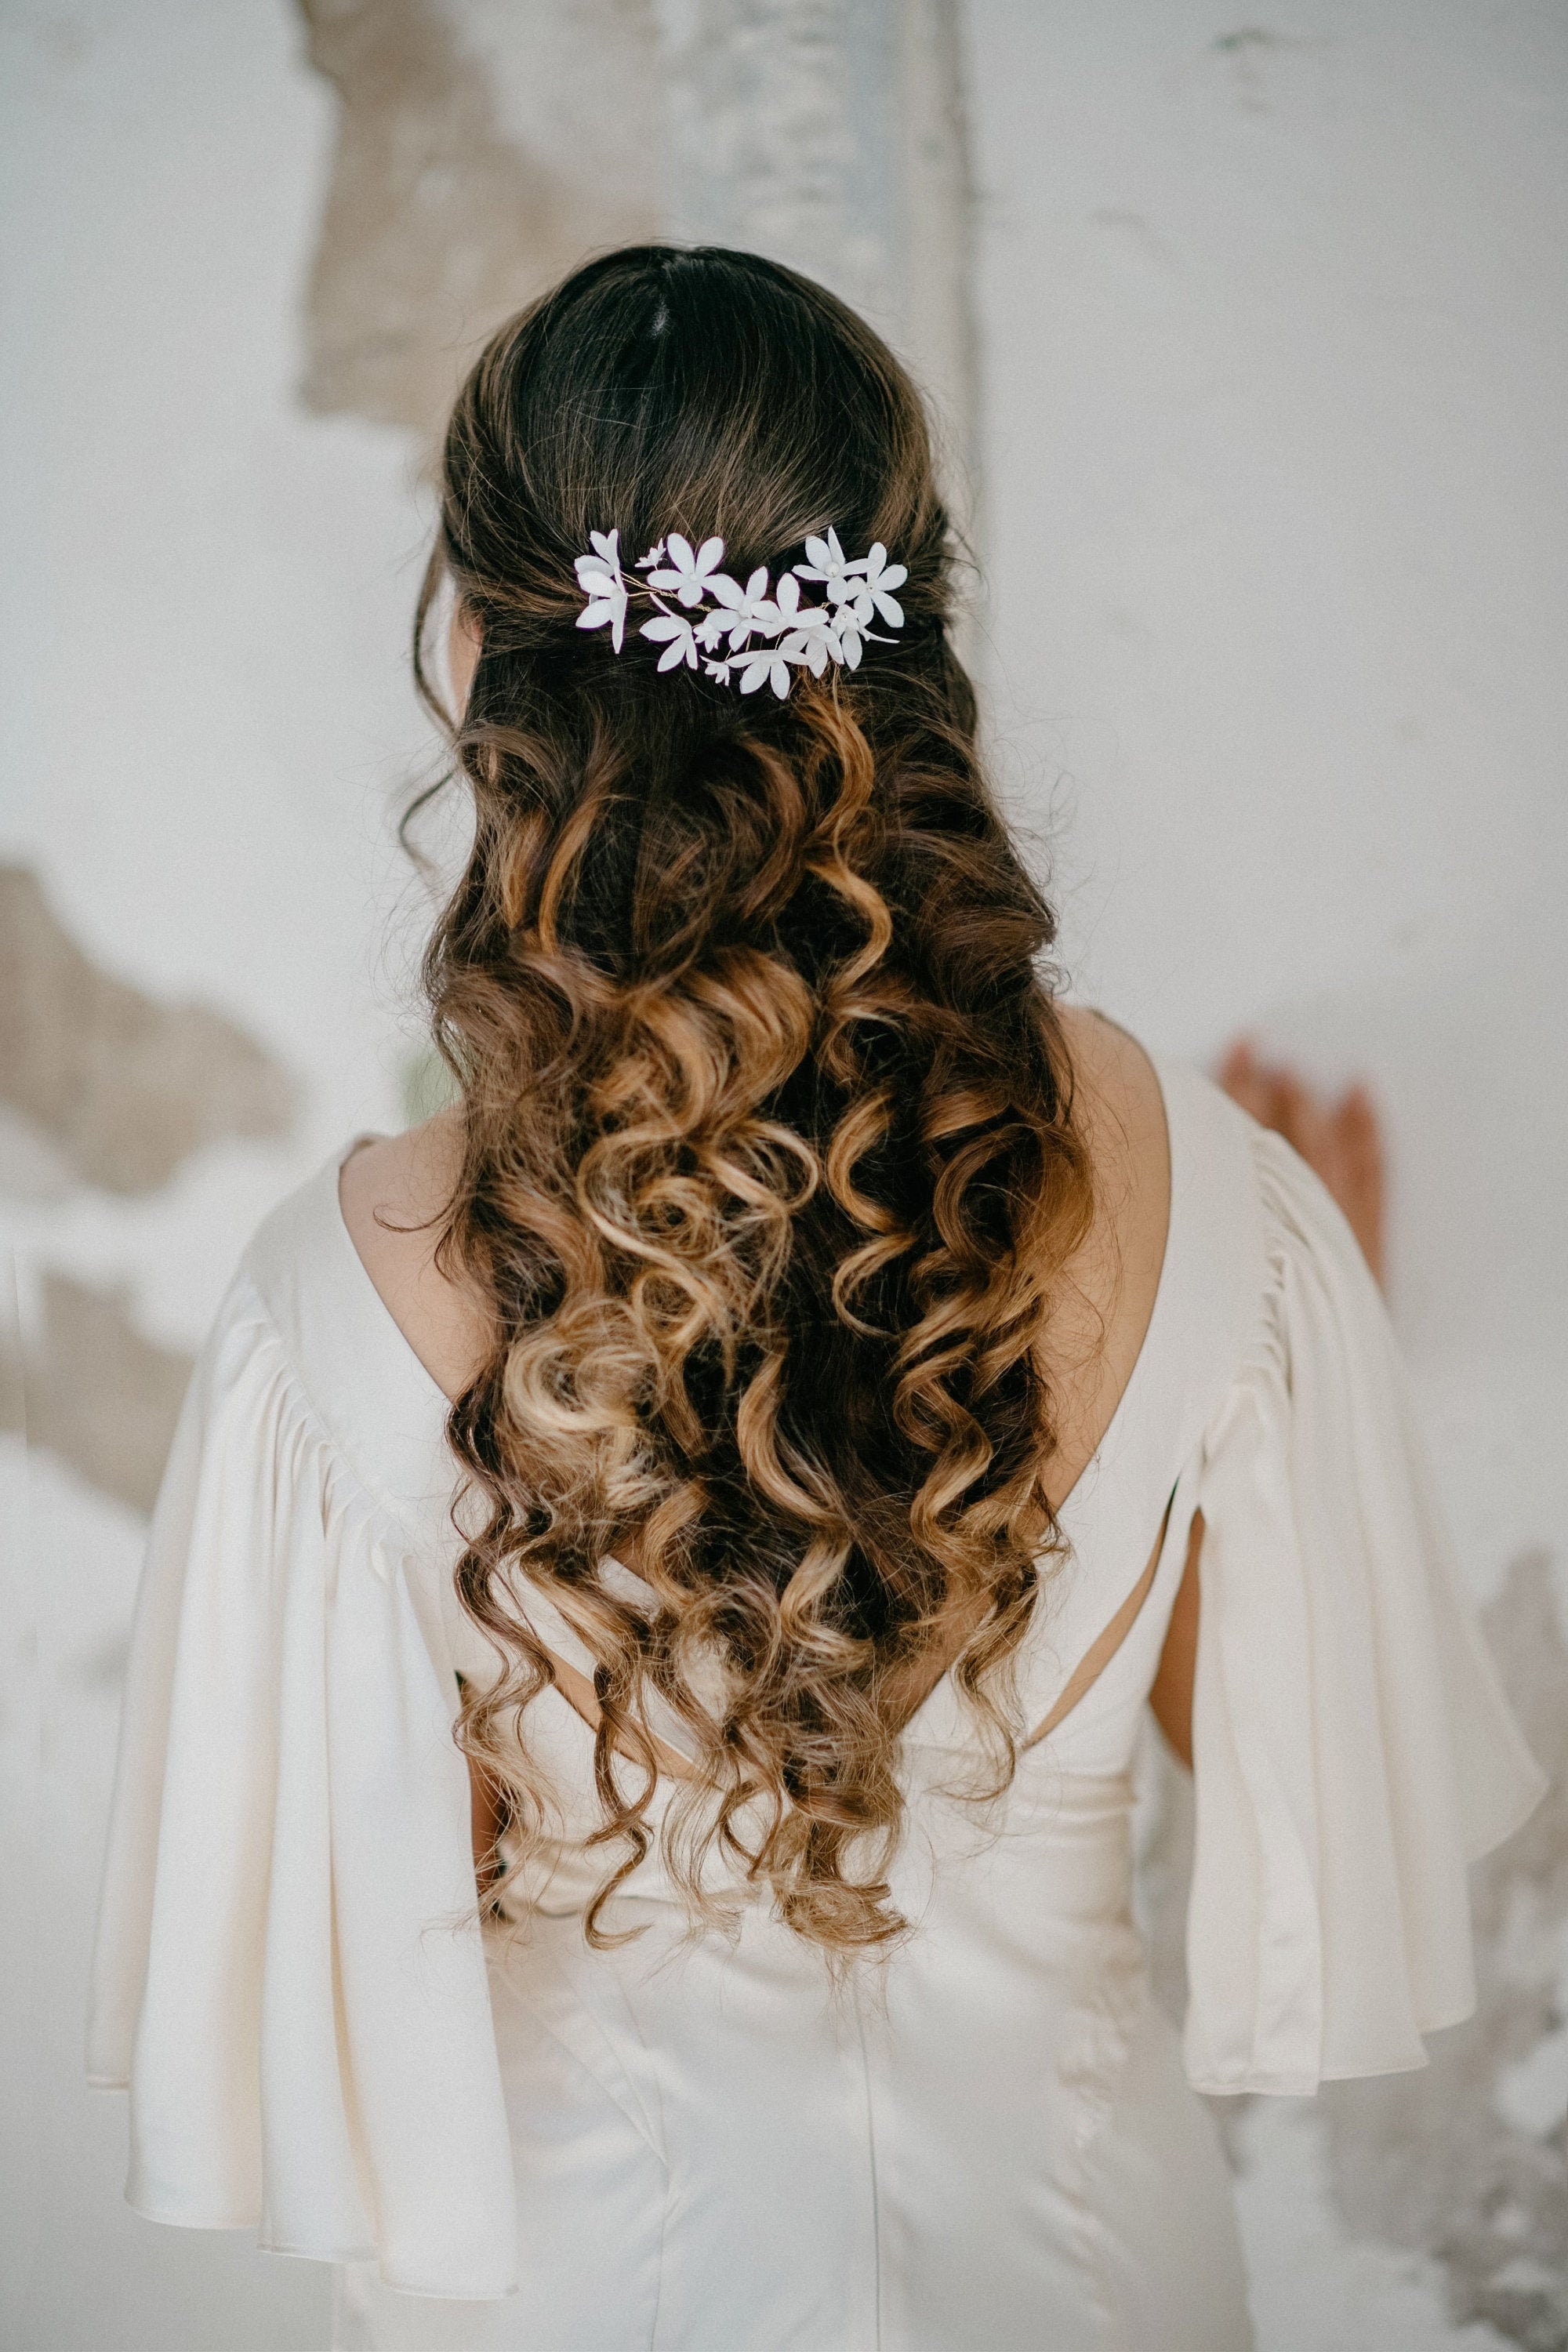 7 Latest Hairstyles That Bridesmaids Can Rock at a Wedding